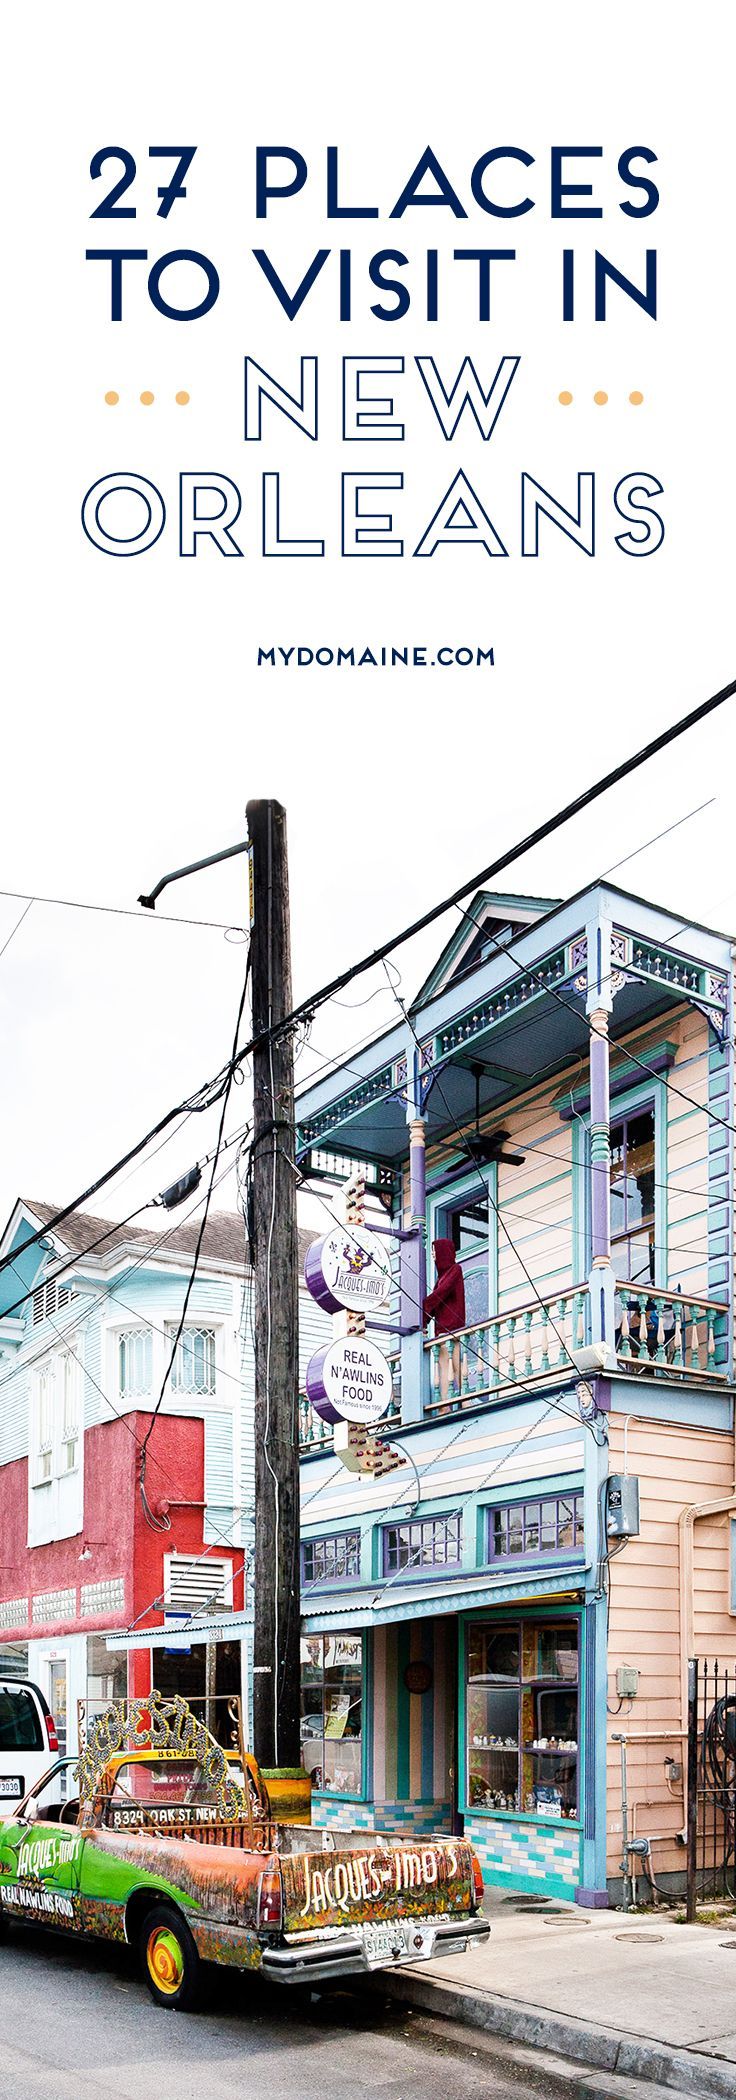 The only NOLA guide you’ll ever need // New Orleans travel